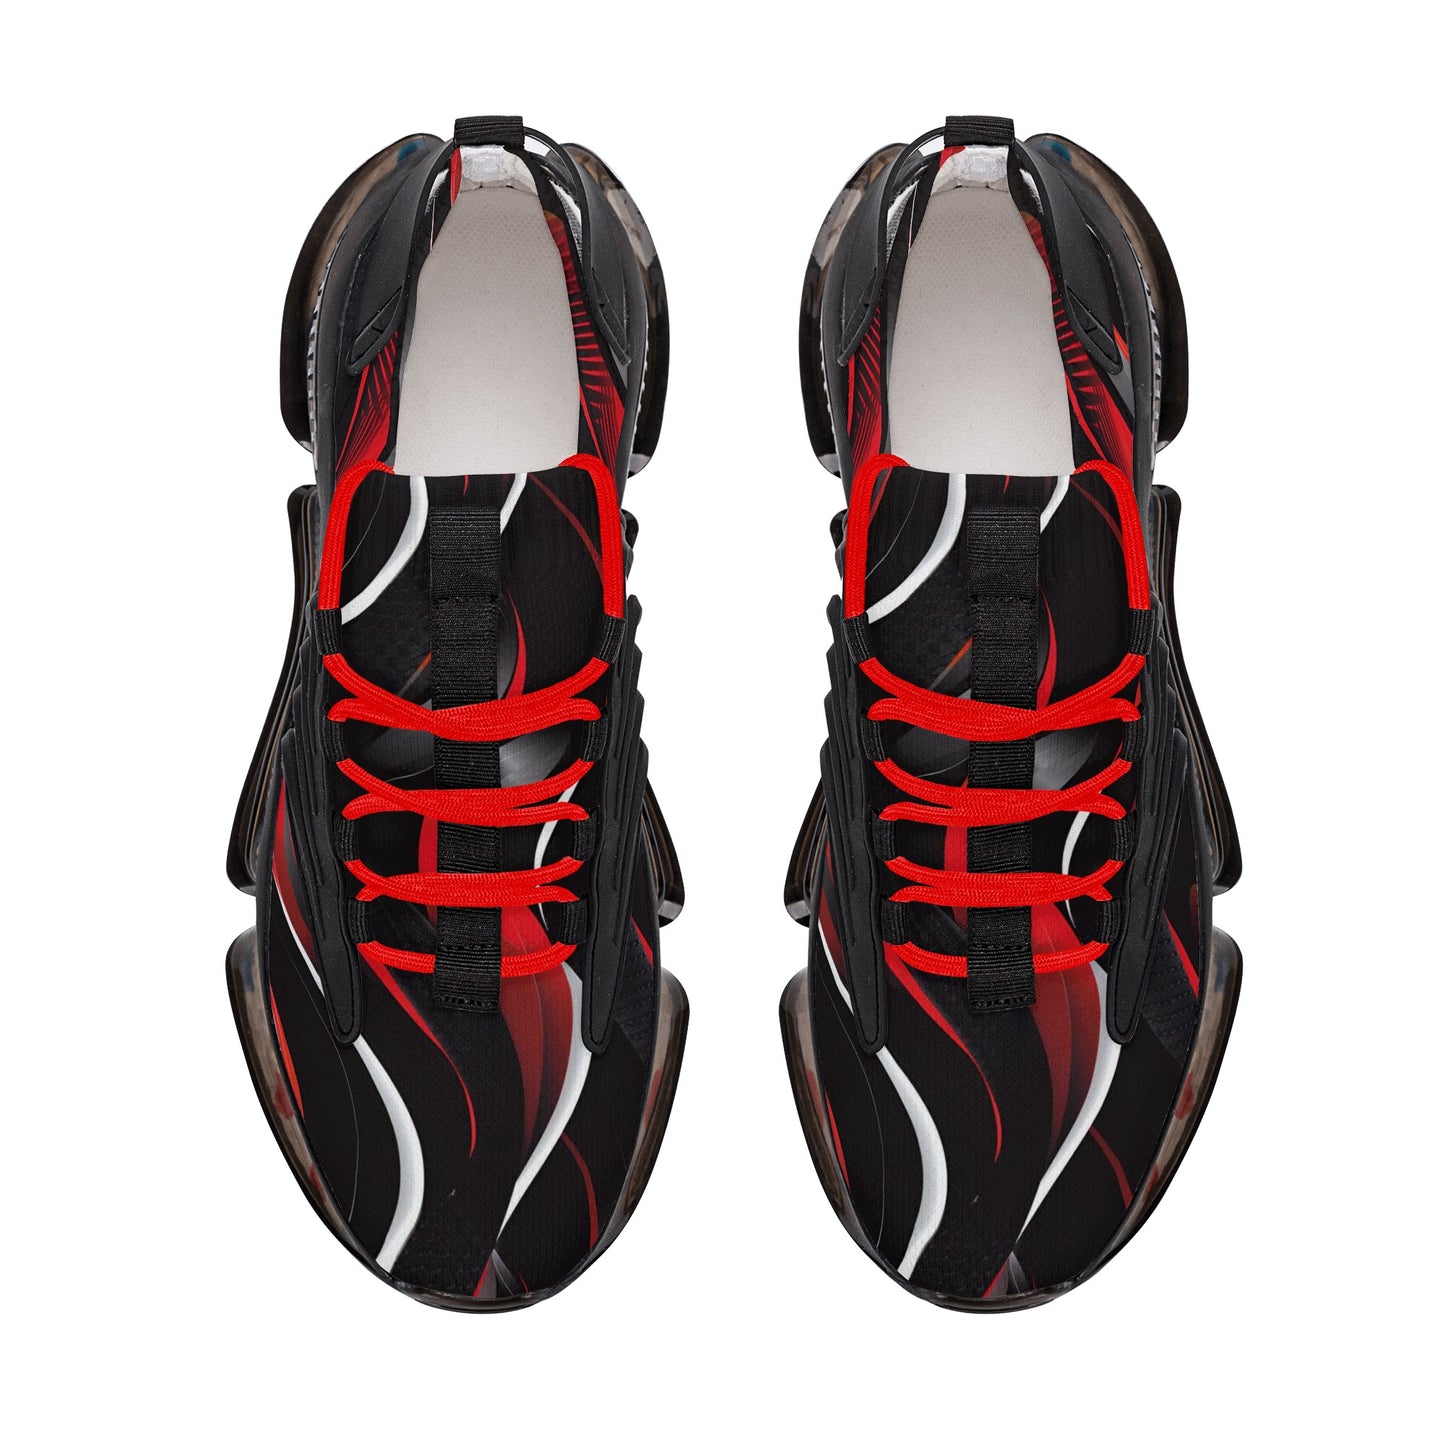 Red and Black Mens Air Cushion Sneakers, Breathable Mesh Running Sport Print Lace Up Trainers Designer Casual Gym Shoes Footwear